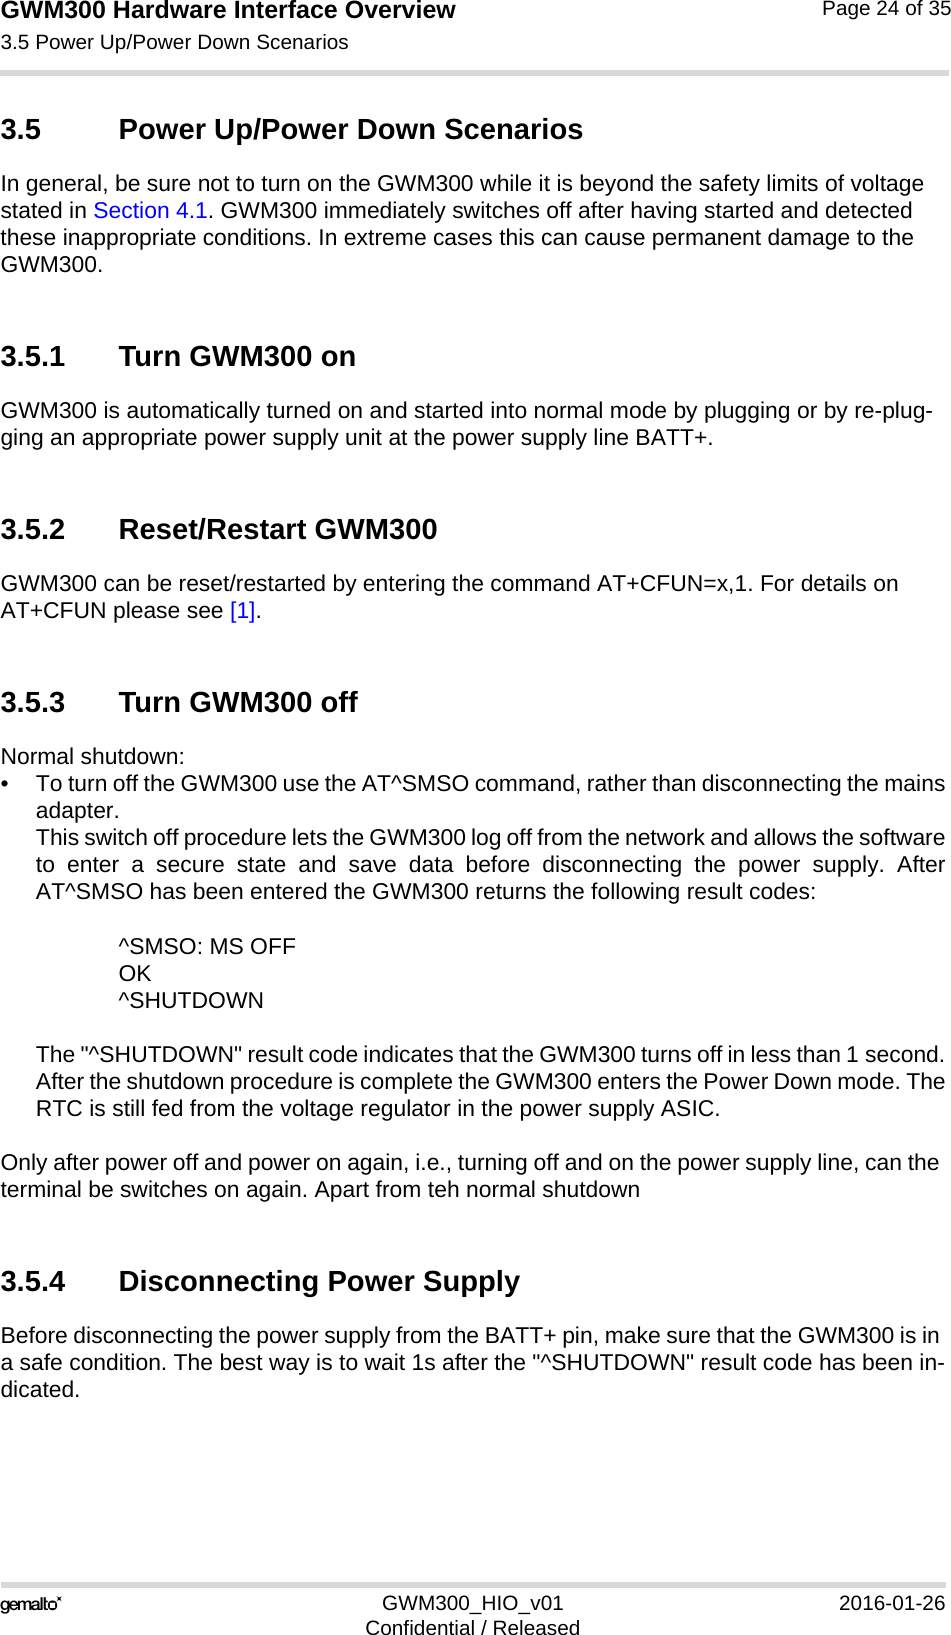 GWM300 Hardware Interface Overview3.5 Power Up/Power Down Scenarios26GWM300_HIO_v01 2016-01-26Confidential / ReleasedPage 24 of 353.5 Power Up/Power Down ScenariosIn general, be sure not to turn on the GWM300 while it is beyond the safety limits of voltage stated in Section 4.1. GWM300 immediately switches off after having started and detected these inappropriate conditions. In extreme cases this can cause permanent damage to the GWM300.3.5.1 Turn GWM300 onGWM300 is automatically turned on and started into normal mode by plugging or by re-plug-ging an appropriate power supply unit at the power supply line BATT+. 3.5.2 Reset/Restart GWM300GWM300 can be reset/restarted by entering the command AT+CFUN=x,1. For details on AT+CFUN please see [1].3.5.3 Turn GWM300 offNormal shutdown:• To turn off the GWM300 use the AT^SMSO command, rather than disconnecting the mainsadapter. This switch off procedure lets the GWM300 log off from the network and allows the softwareto enter a secure state and save data before disconnecting the power supply. AfterAT^SMSO has been entered the GWM300 returns the following result codes: ^SMSO: MS OFFOK^SHUTDOWNThe &quot;^SHUTDOWN&quot; result code indicates that the GWM300 turns off in less than 1 second.After the shutdown procedure is complete the GWM300 enters the Power Down mode. TheRTC is still fed from the voltage regulator in the power supply ASIC.Only after power off and power on again, i.e., turning off and on the power supply line, can the terminal be switches on again. Apart from teh normal shutdown 3.5.4 Disconnecting Power SupplyBefore disconnecting the power supply from the BATT+ pin, make sure that the GWM300 is in a safe condition. The best way is to wait 1s after the &quot;^SHUTDOWN&quot; result code has been in-dicated. 